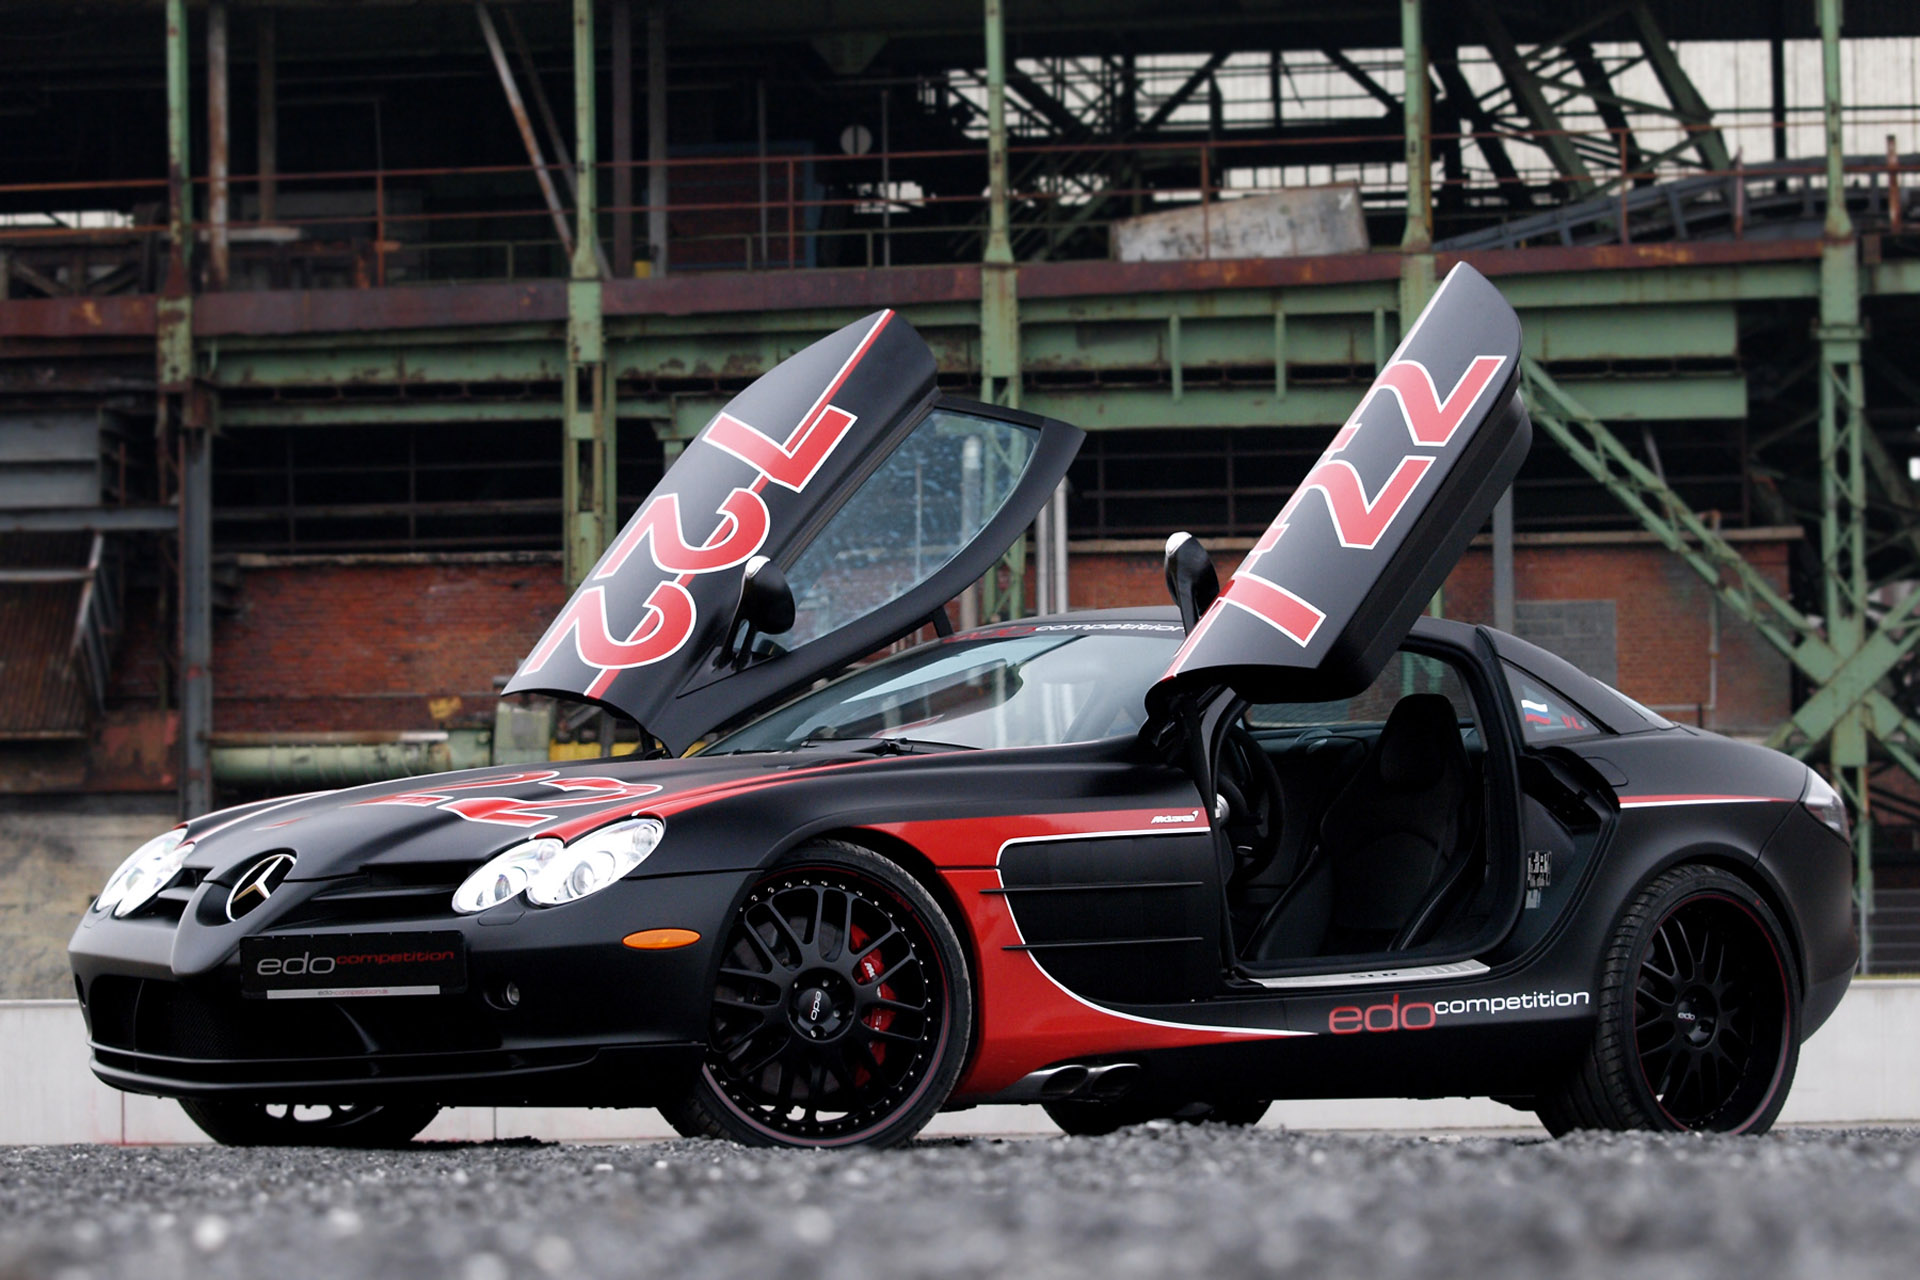 2011, Edo competition, Mercedes, Benz, Slr, Tuning Wallpaper